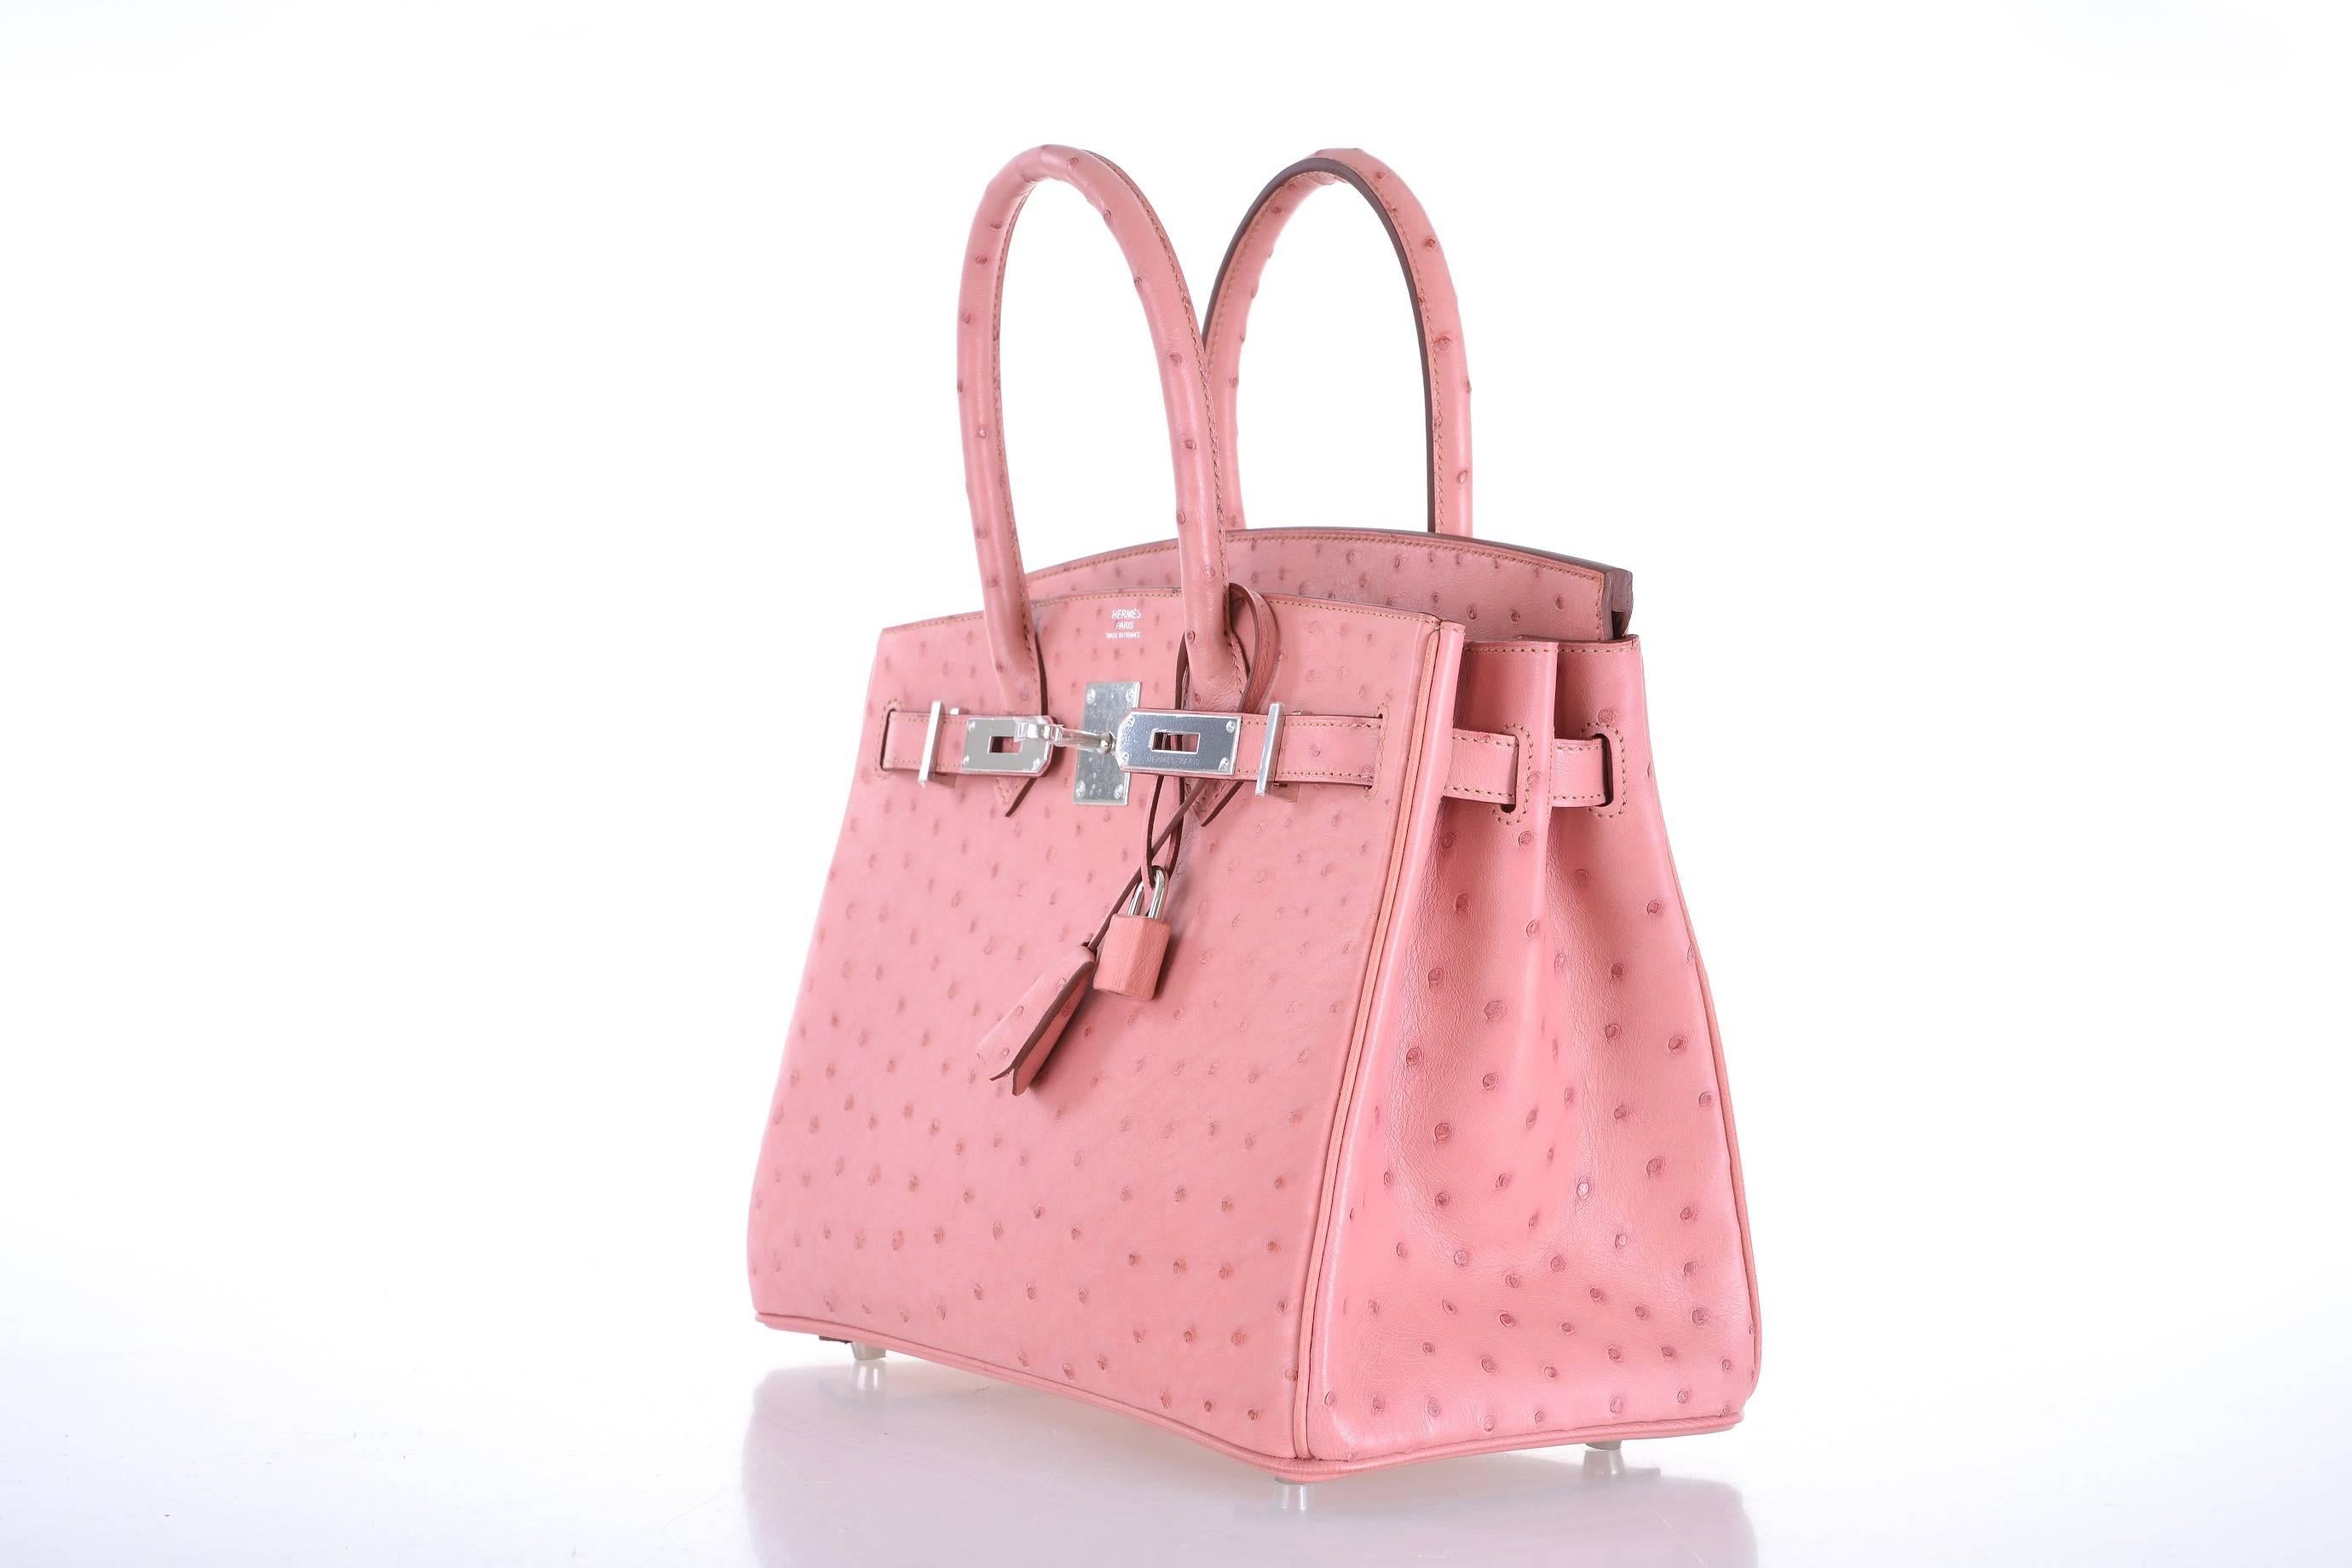 Pink HERMES BIRKIN BAG 30CM OSTRICH TERRE CUITE PINK WITH PALL HARDWARE JaneFinds For Sale